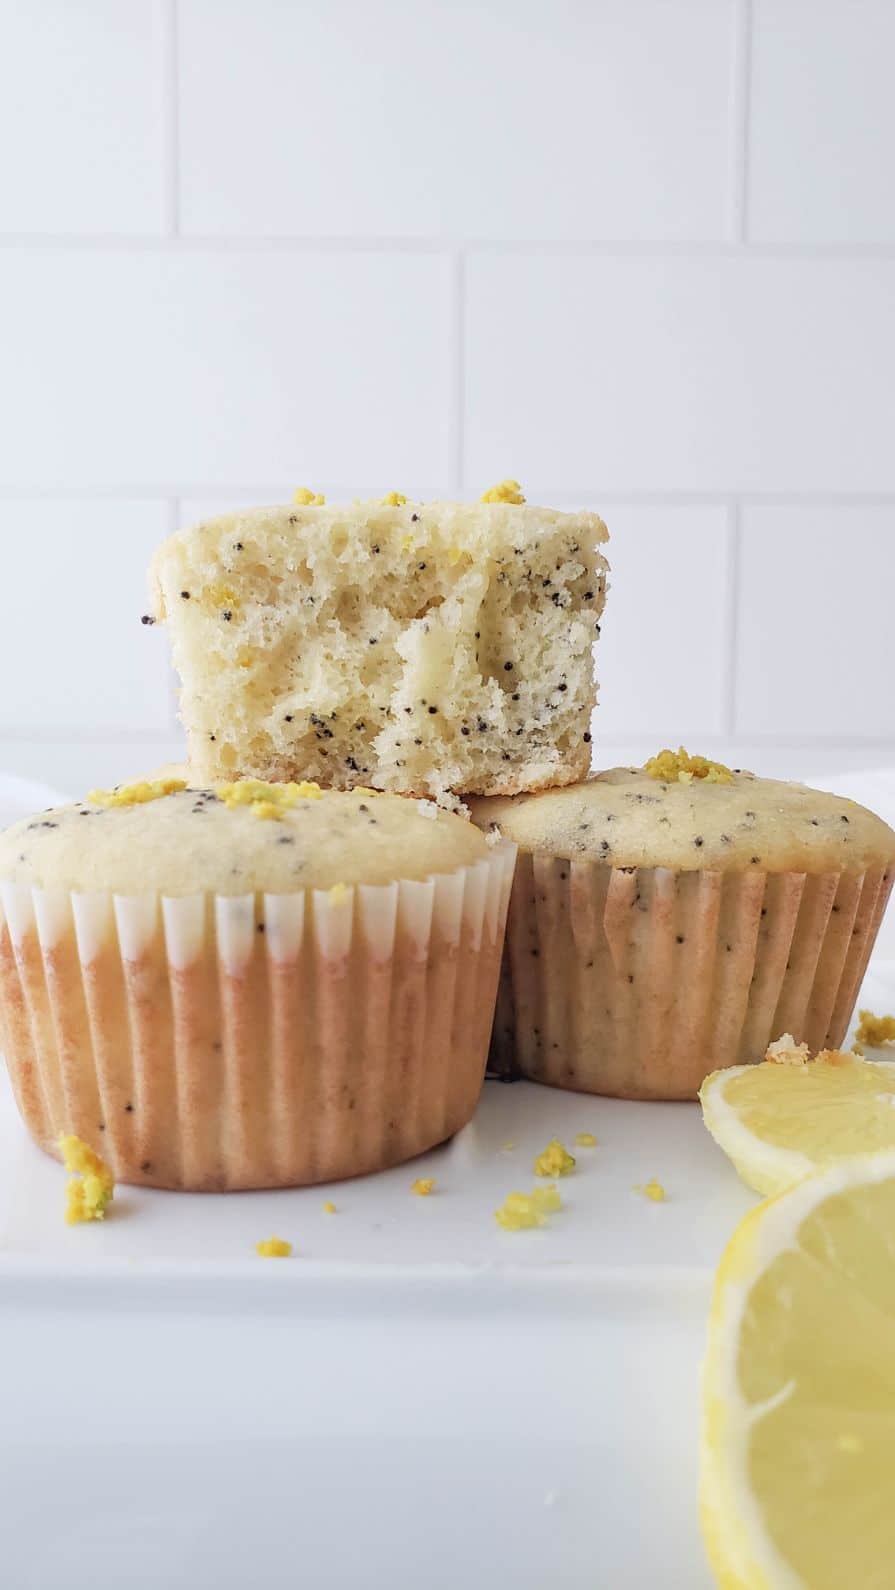 One bitten muffin stacked on top of two whole muffins with slices of lemon in the foreground